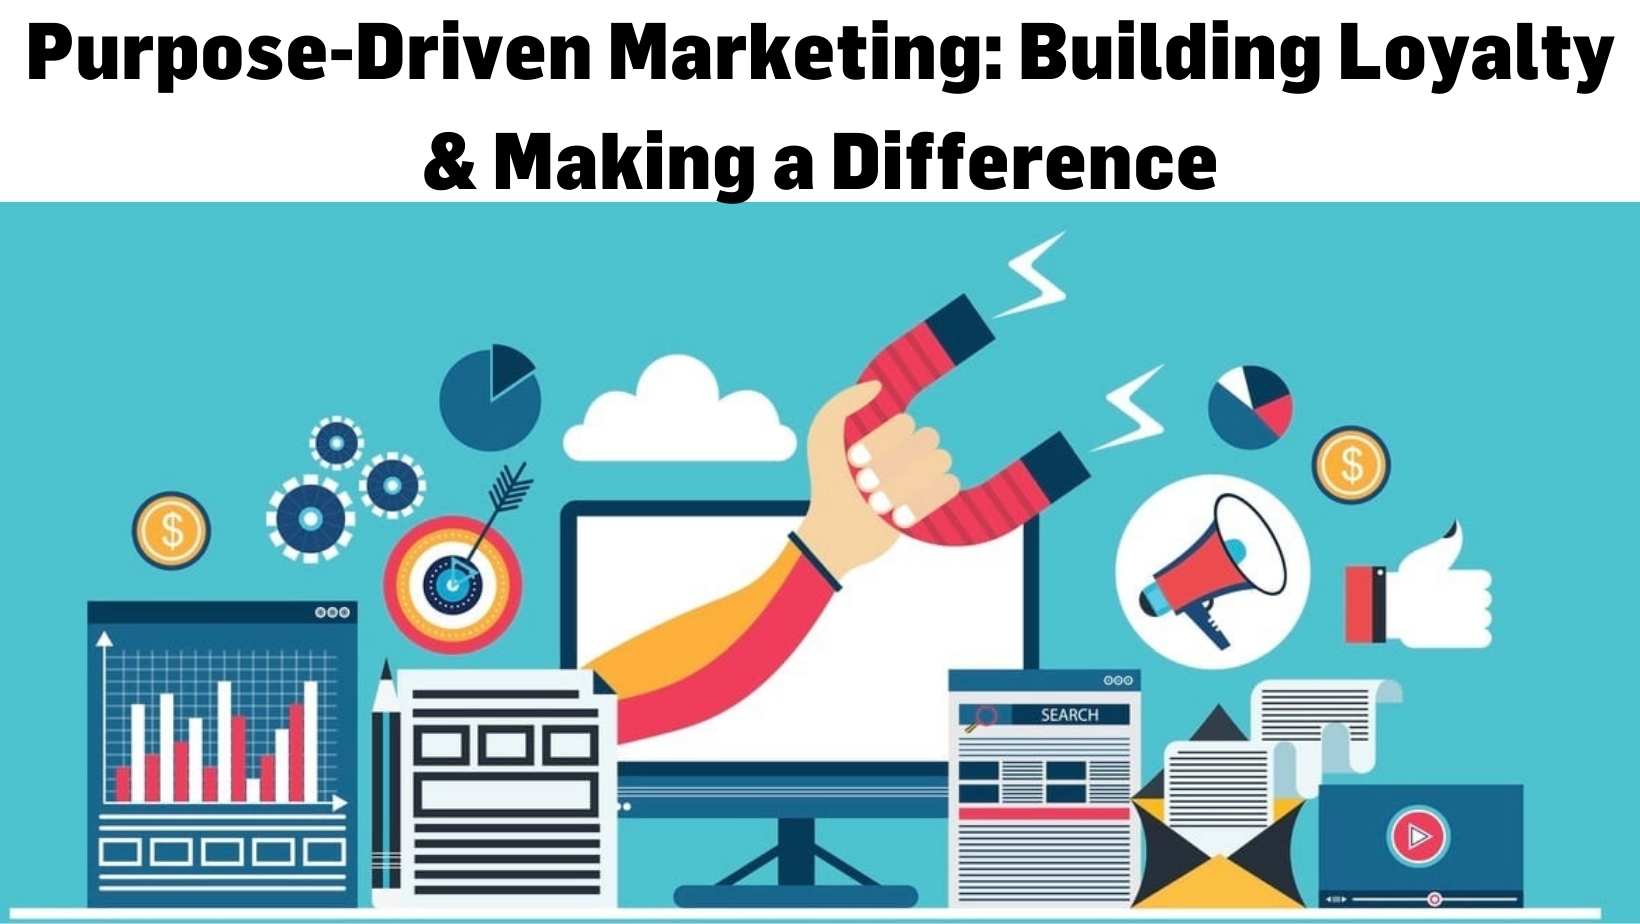 Purpose-Driven Marketing: Building Loyalty & Making a Difference